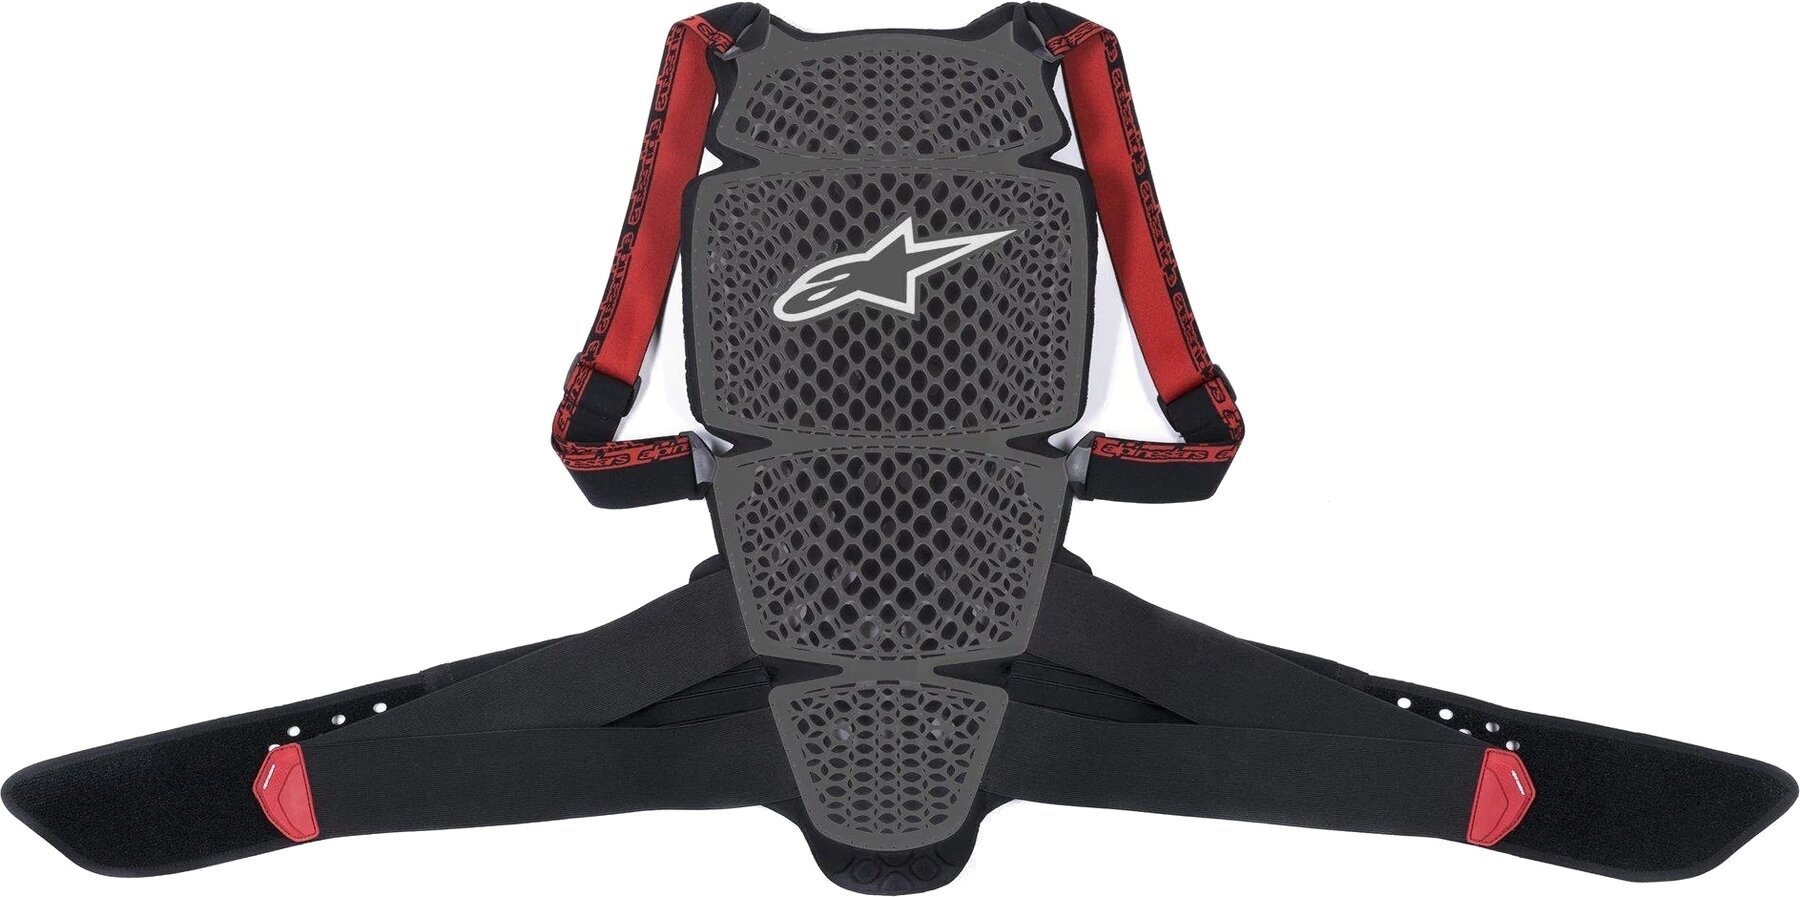 Back Protector Alpinestars Back Protector Nucleon KR-Cell Smoke Black/Red XL